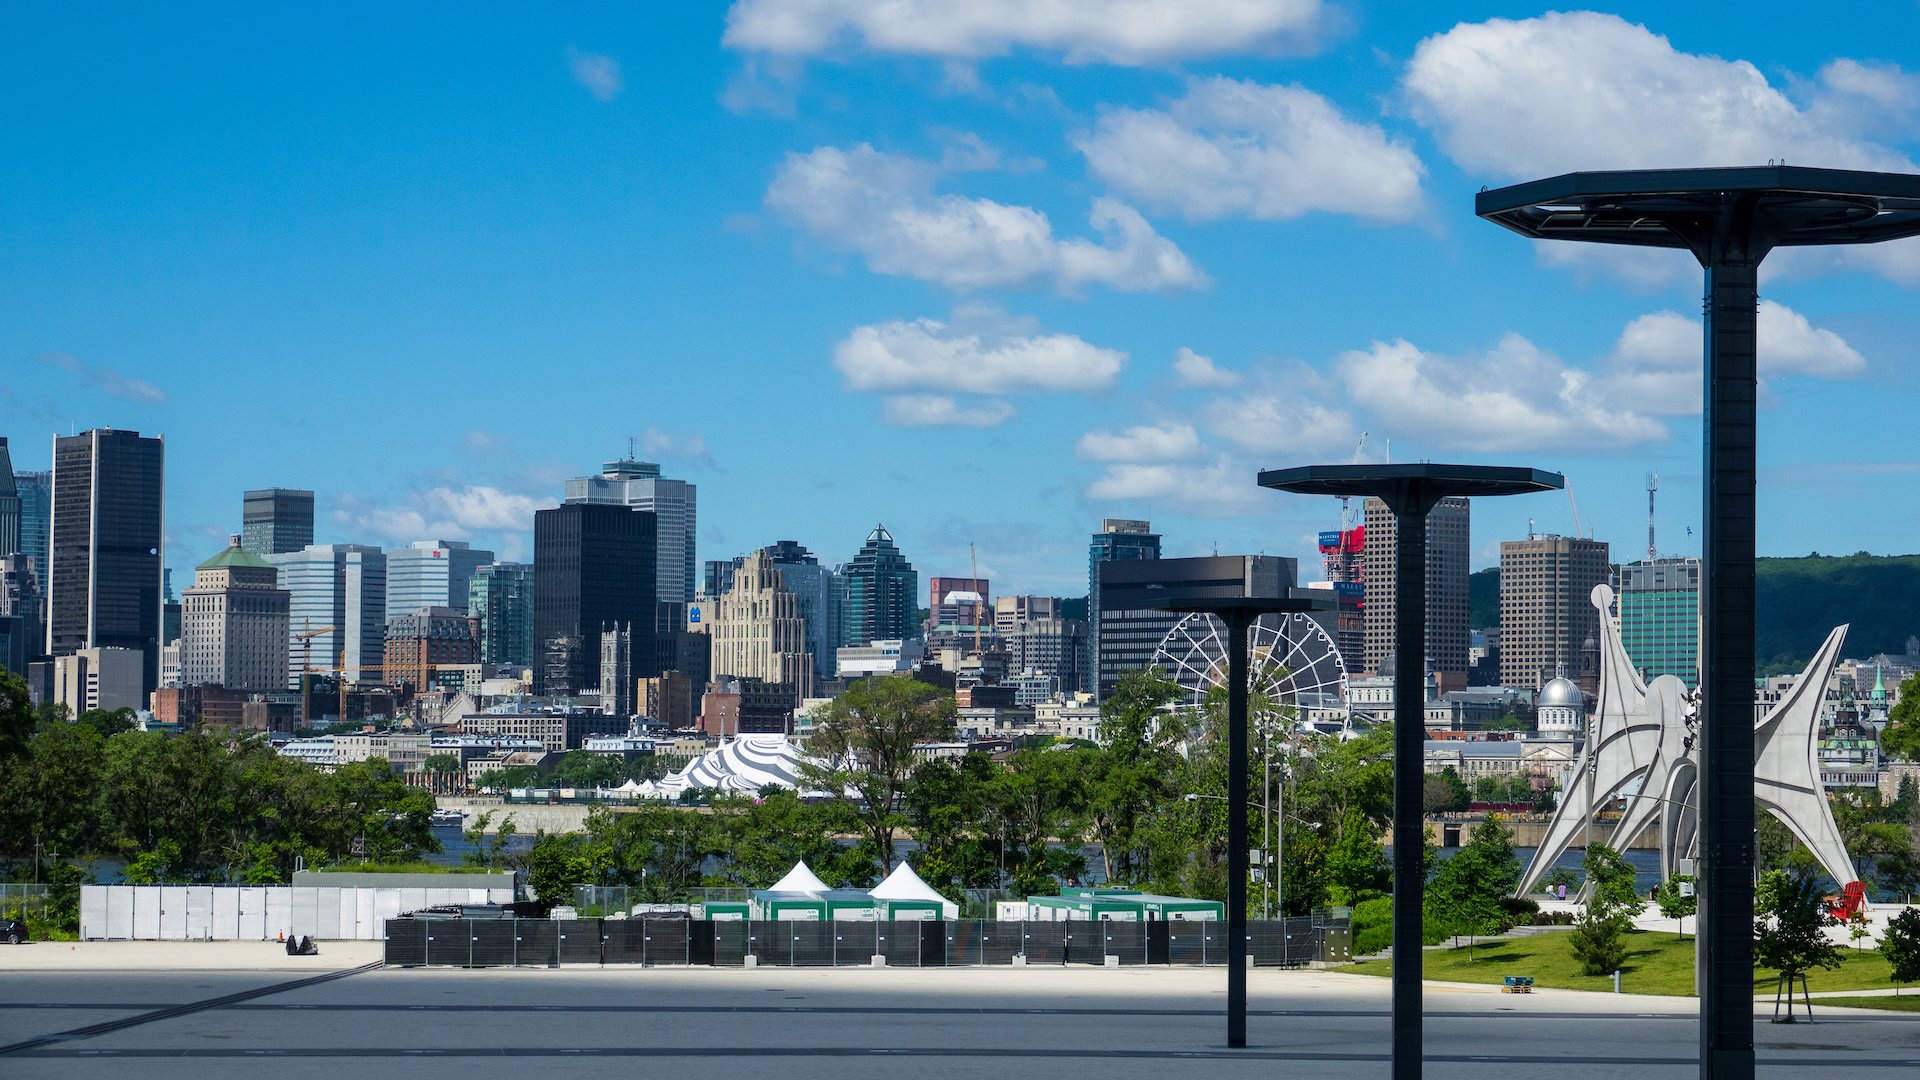  THe view back at the City of Montreal from the top of the little hill. 